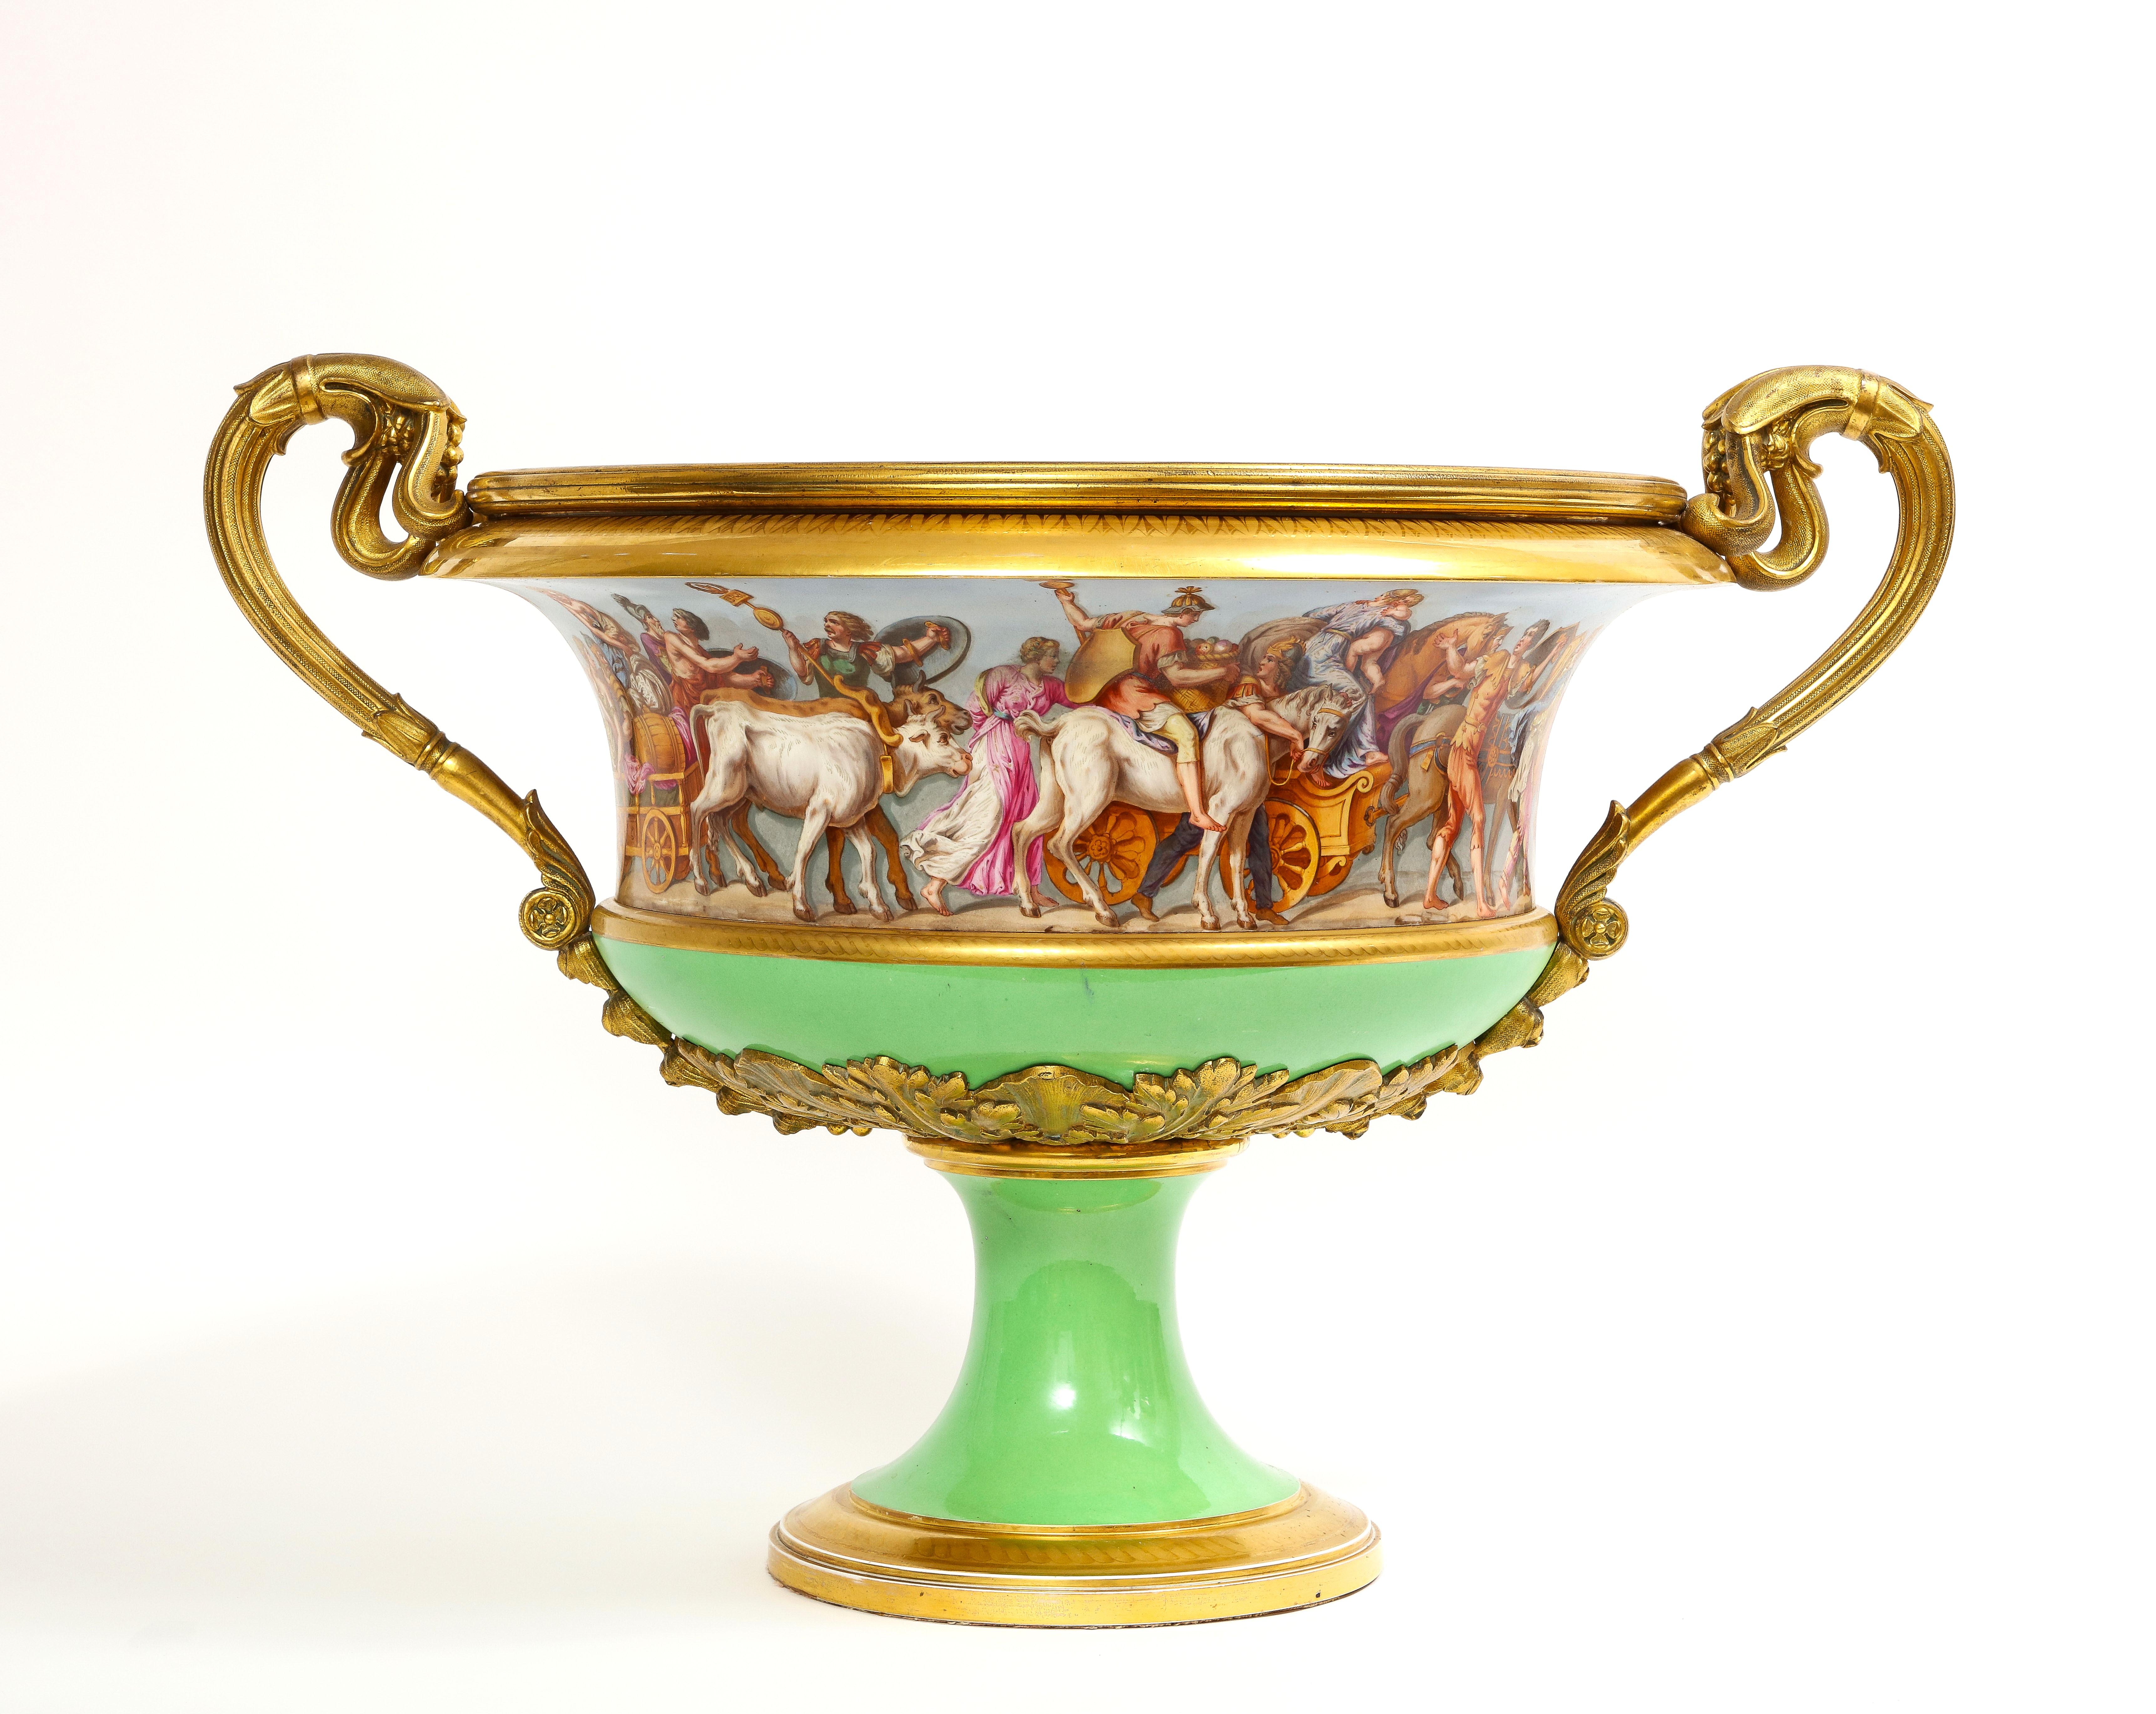 A monumental and important 19th century French sevres porcelain ormolu-mounted two-handle campana form centerpiece/vase. This is a truly Sevres masterpiece. Sevres vases of this size with ormolu mounted handles are very rare. The piece is beautiful